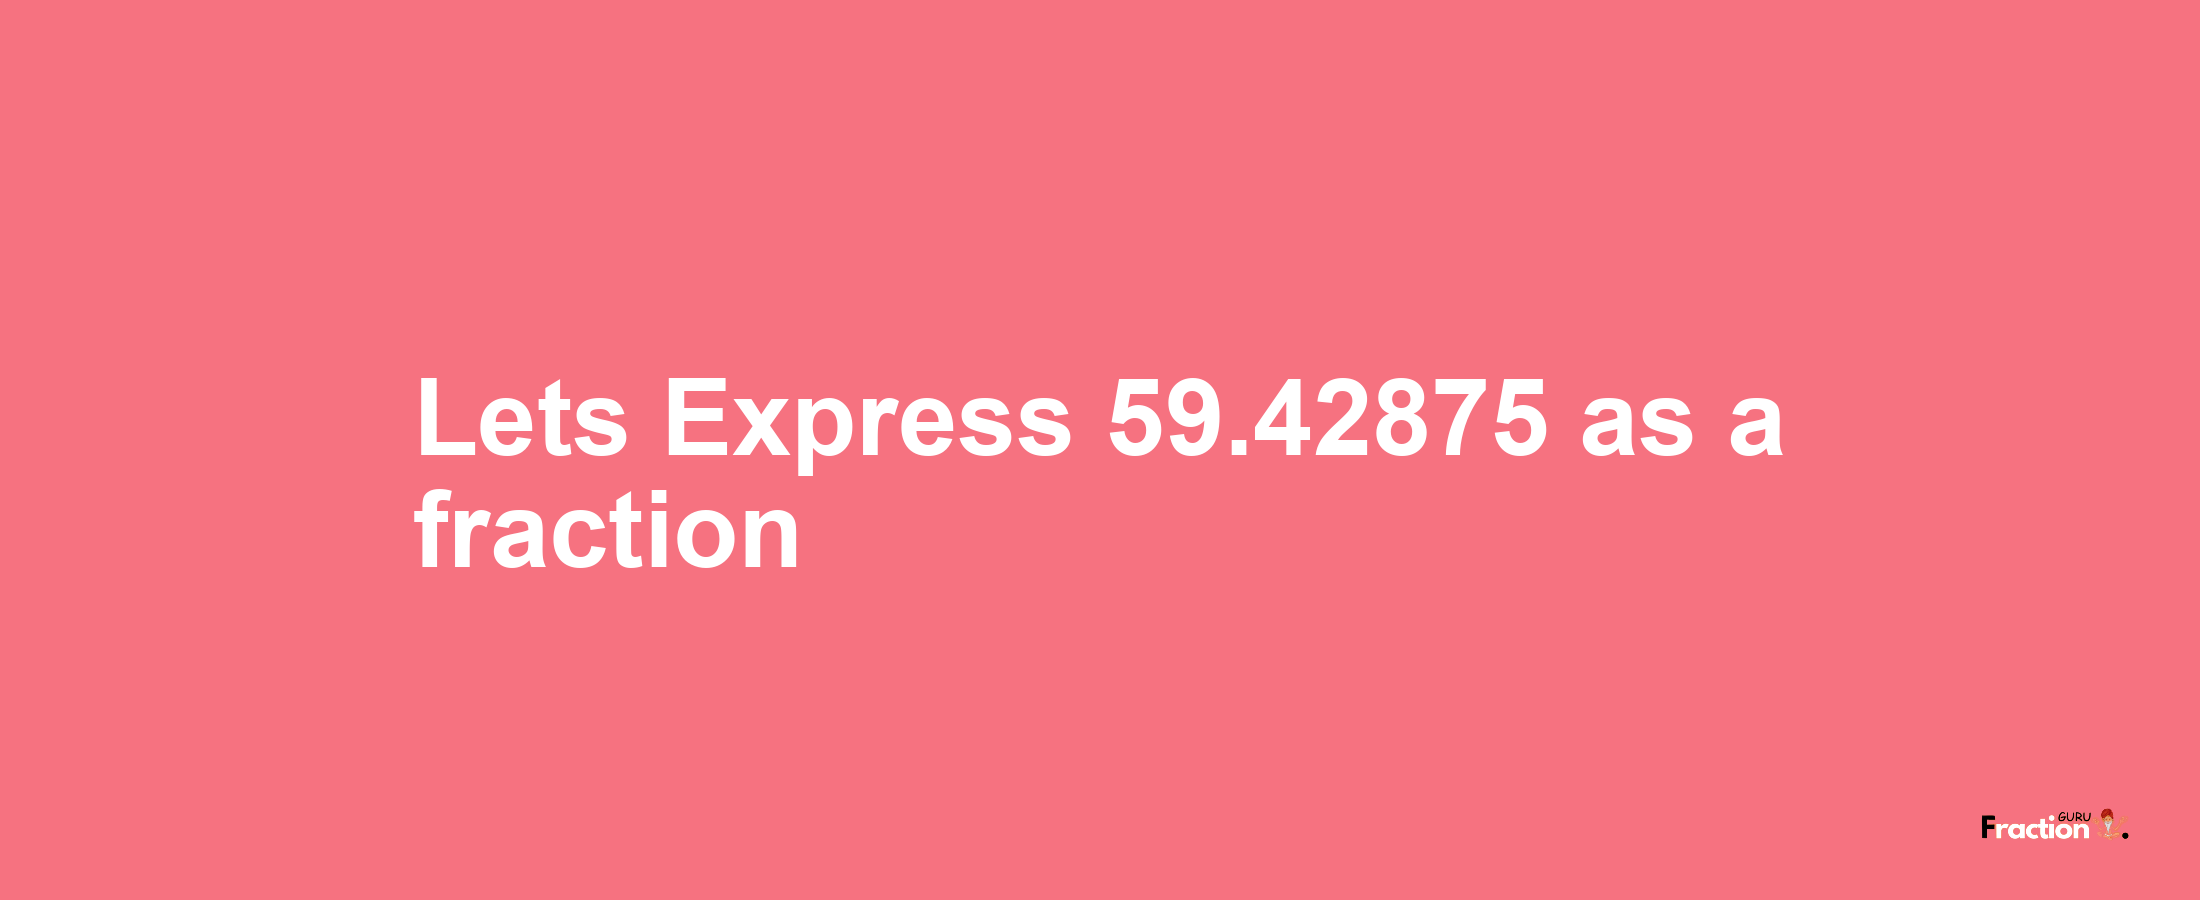 Lets Express 59.42875 as afraction